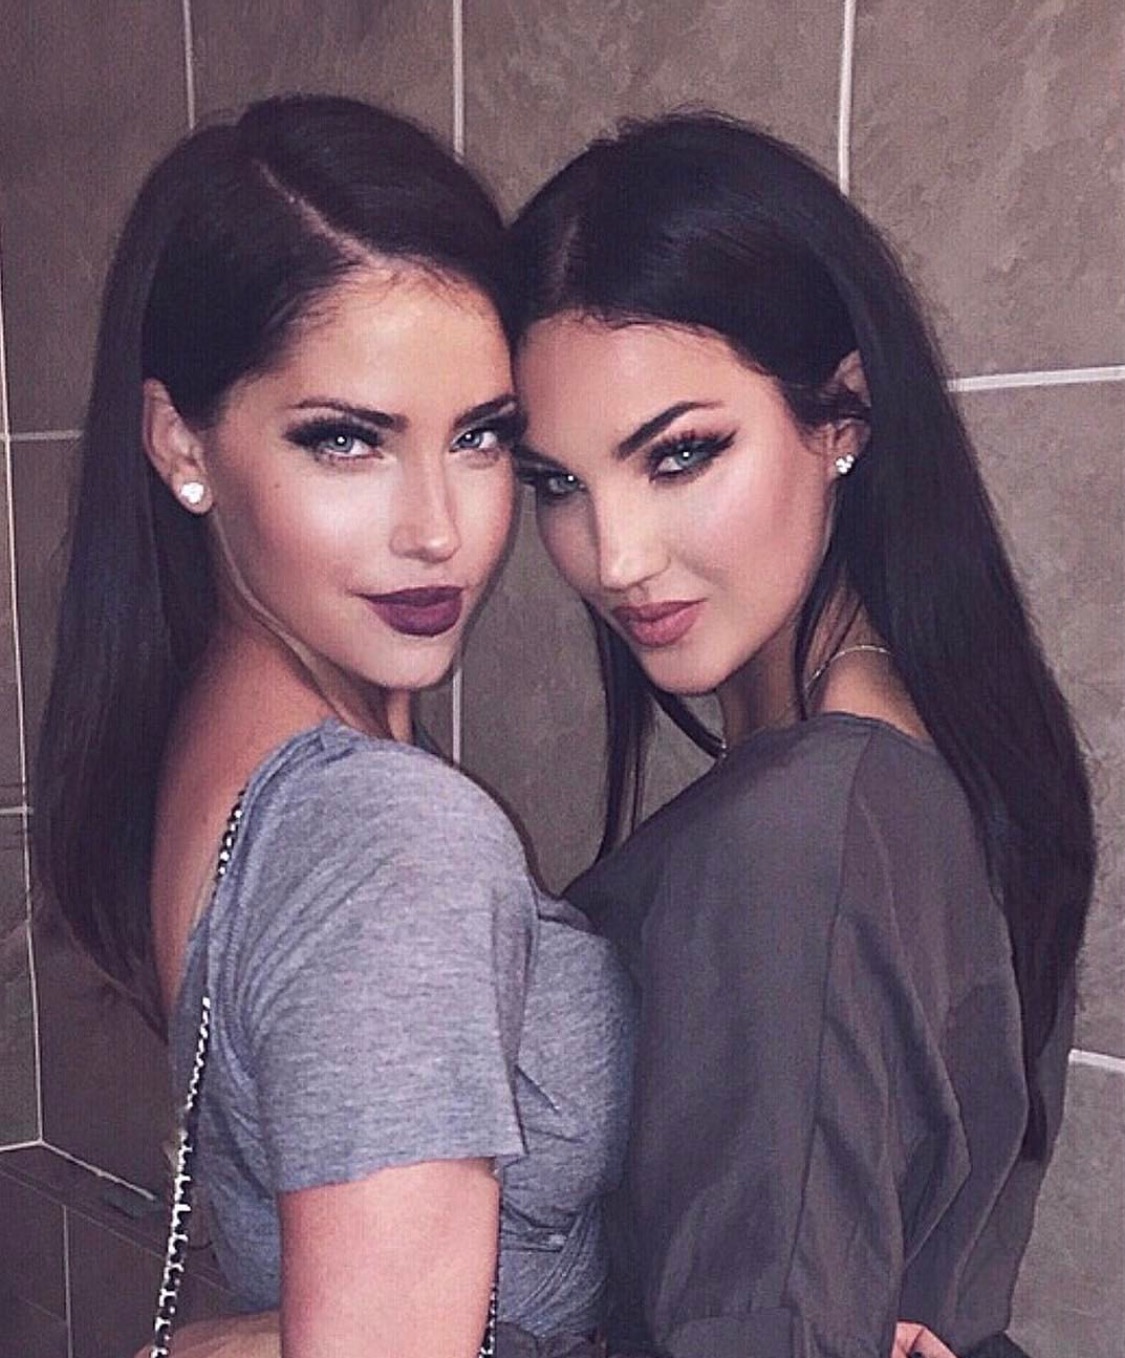 Who Are Natalie Halcro And Olivia Pierson Slaylebrity